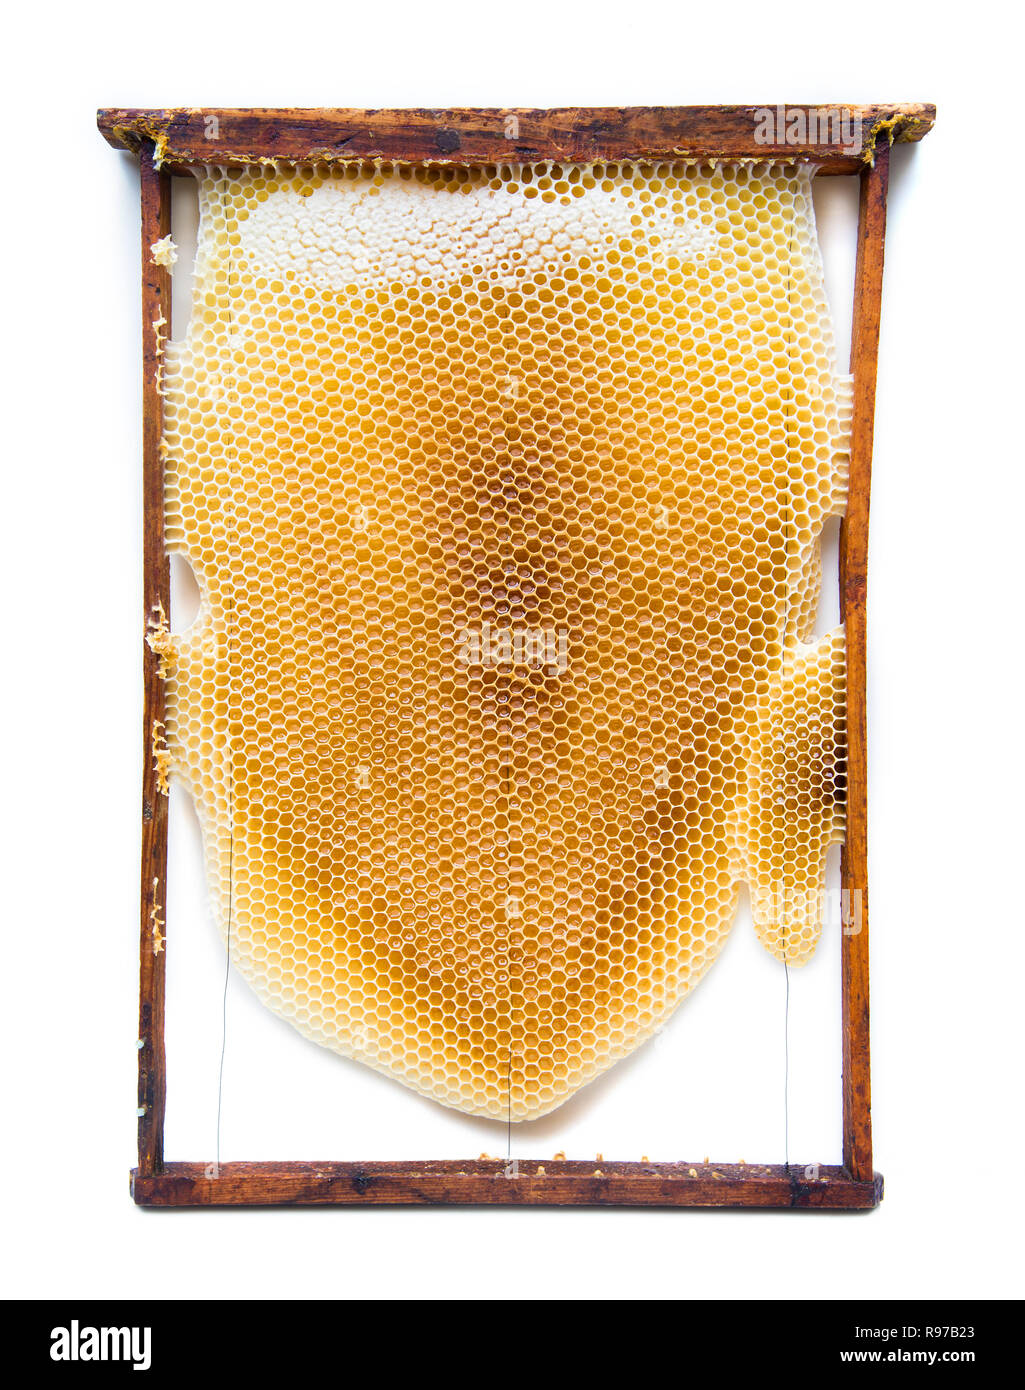 Apiary hive frame with bees wax structure full of fresh bee honey in honeycombs. Isolated on white background Stock Photo